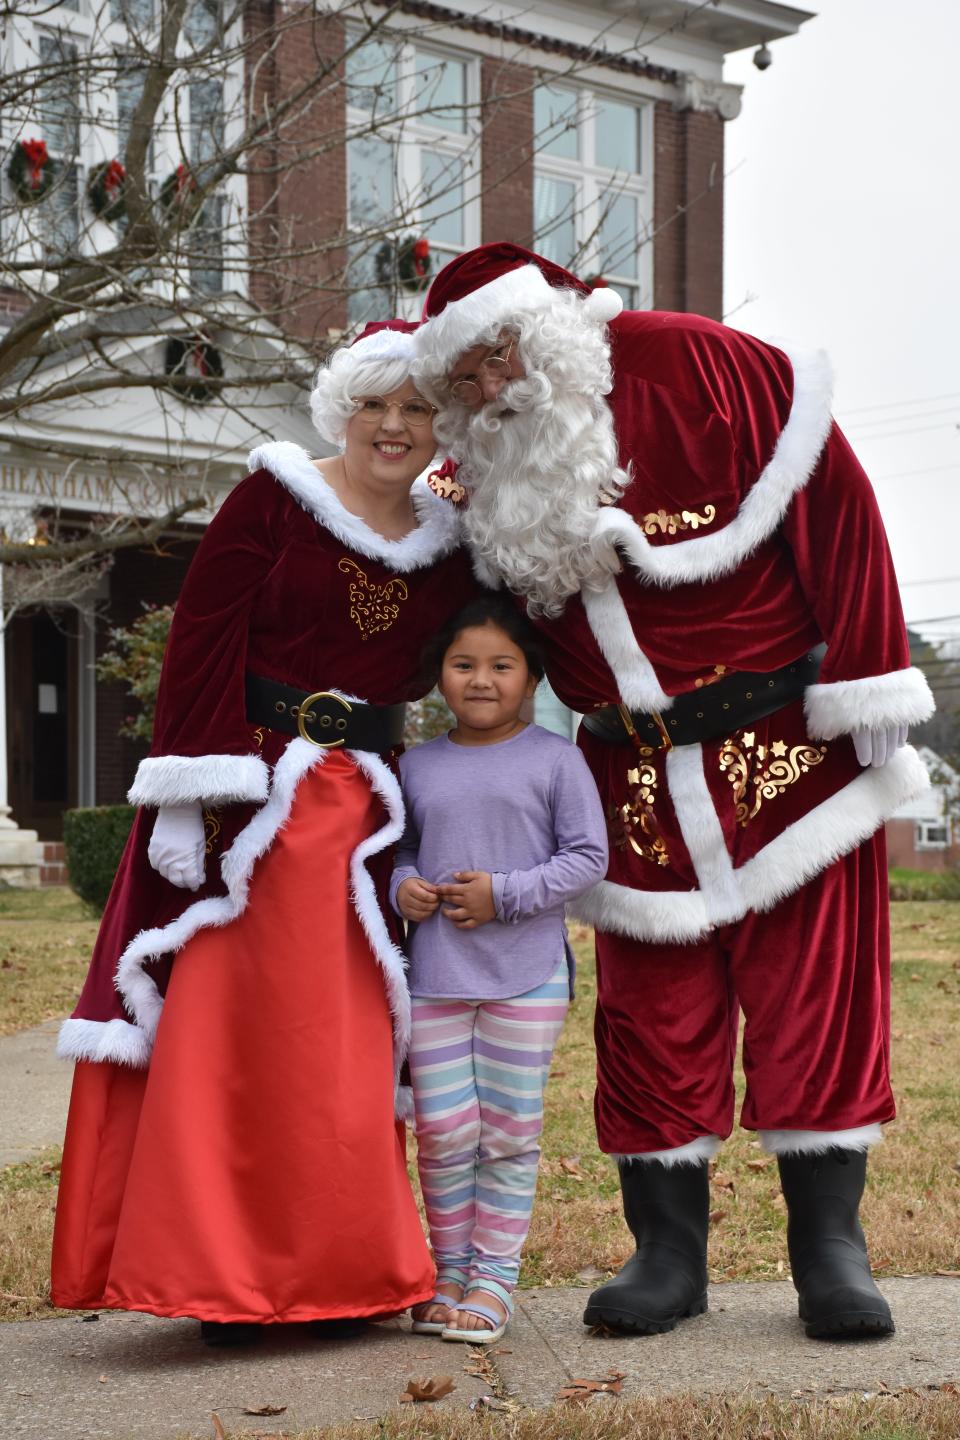 Angela Mares posed for her photo with Mr. and Mrs. Claus.